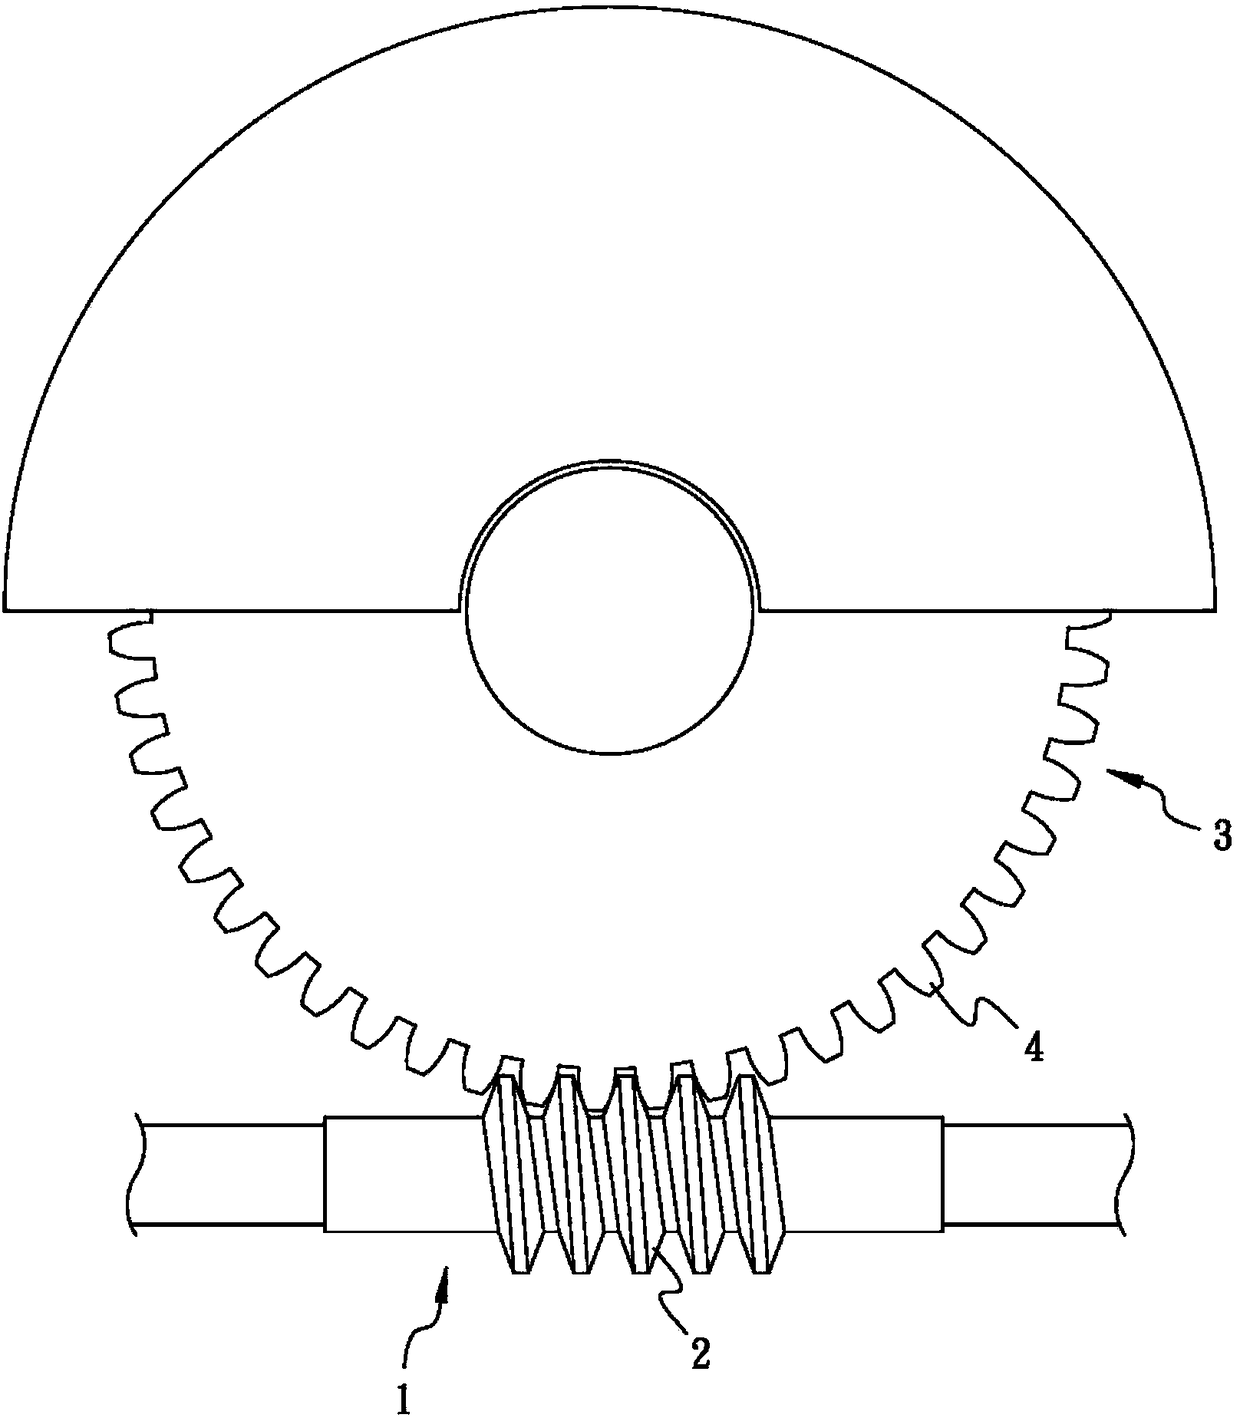 Transmission structure of graduated disk